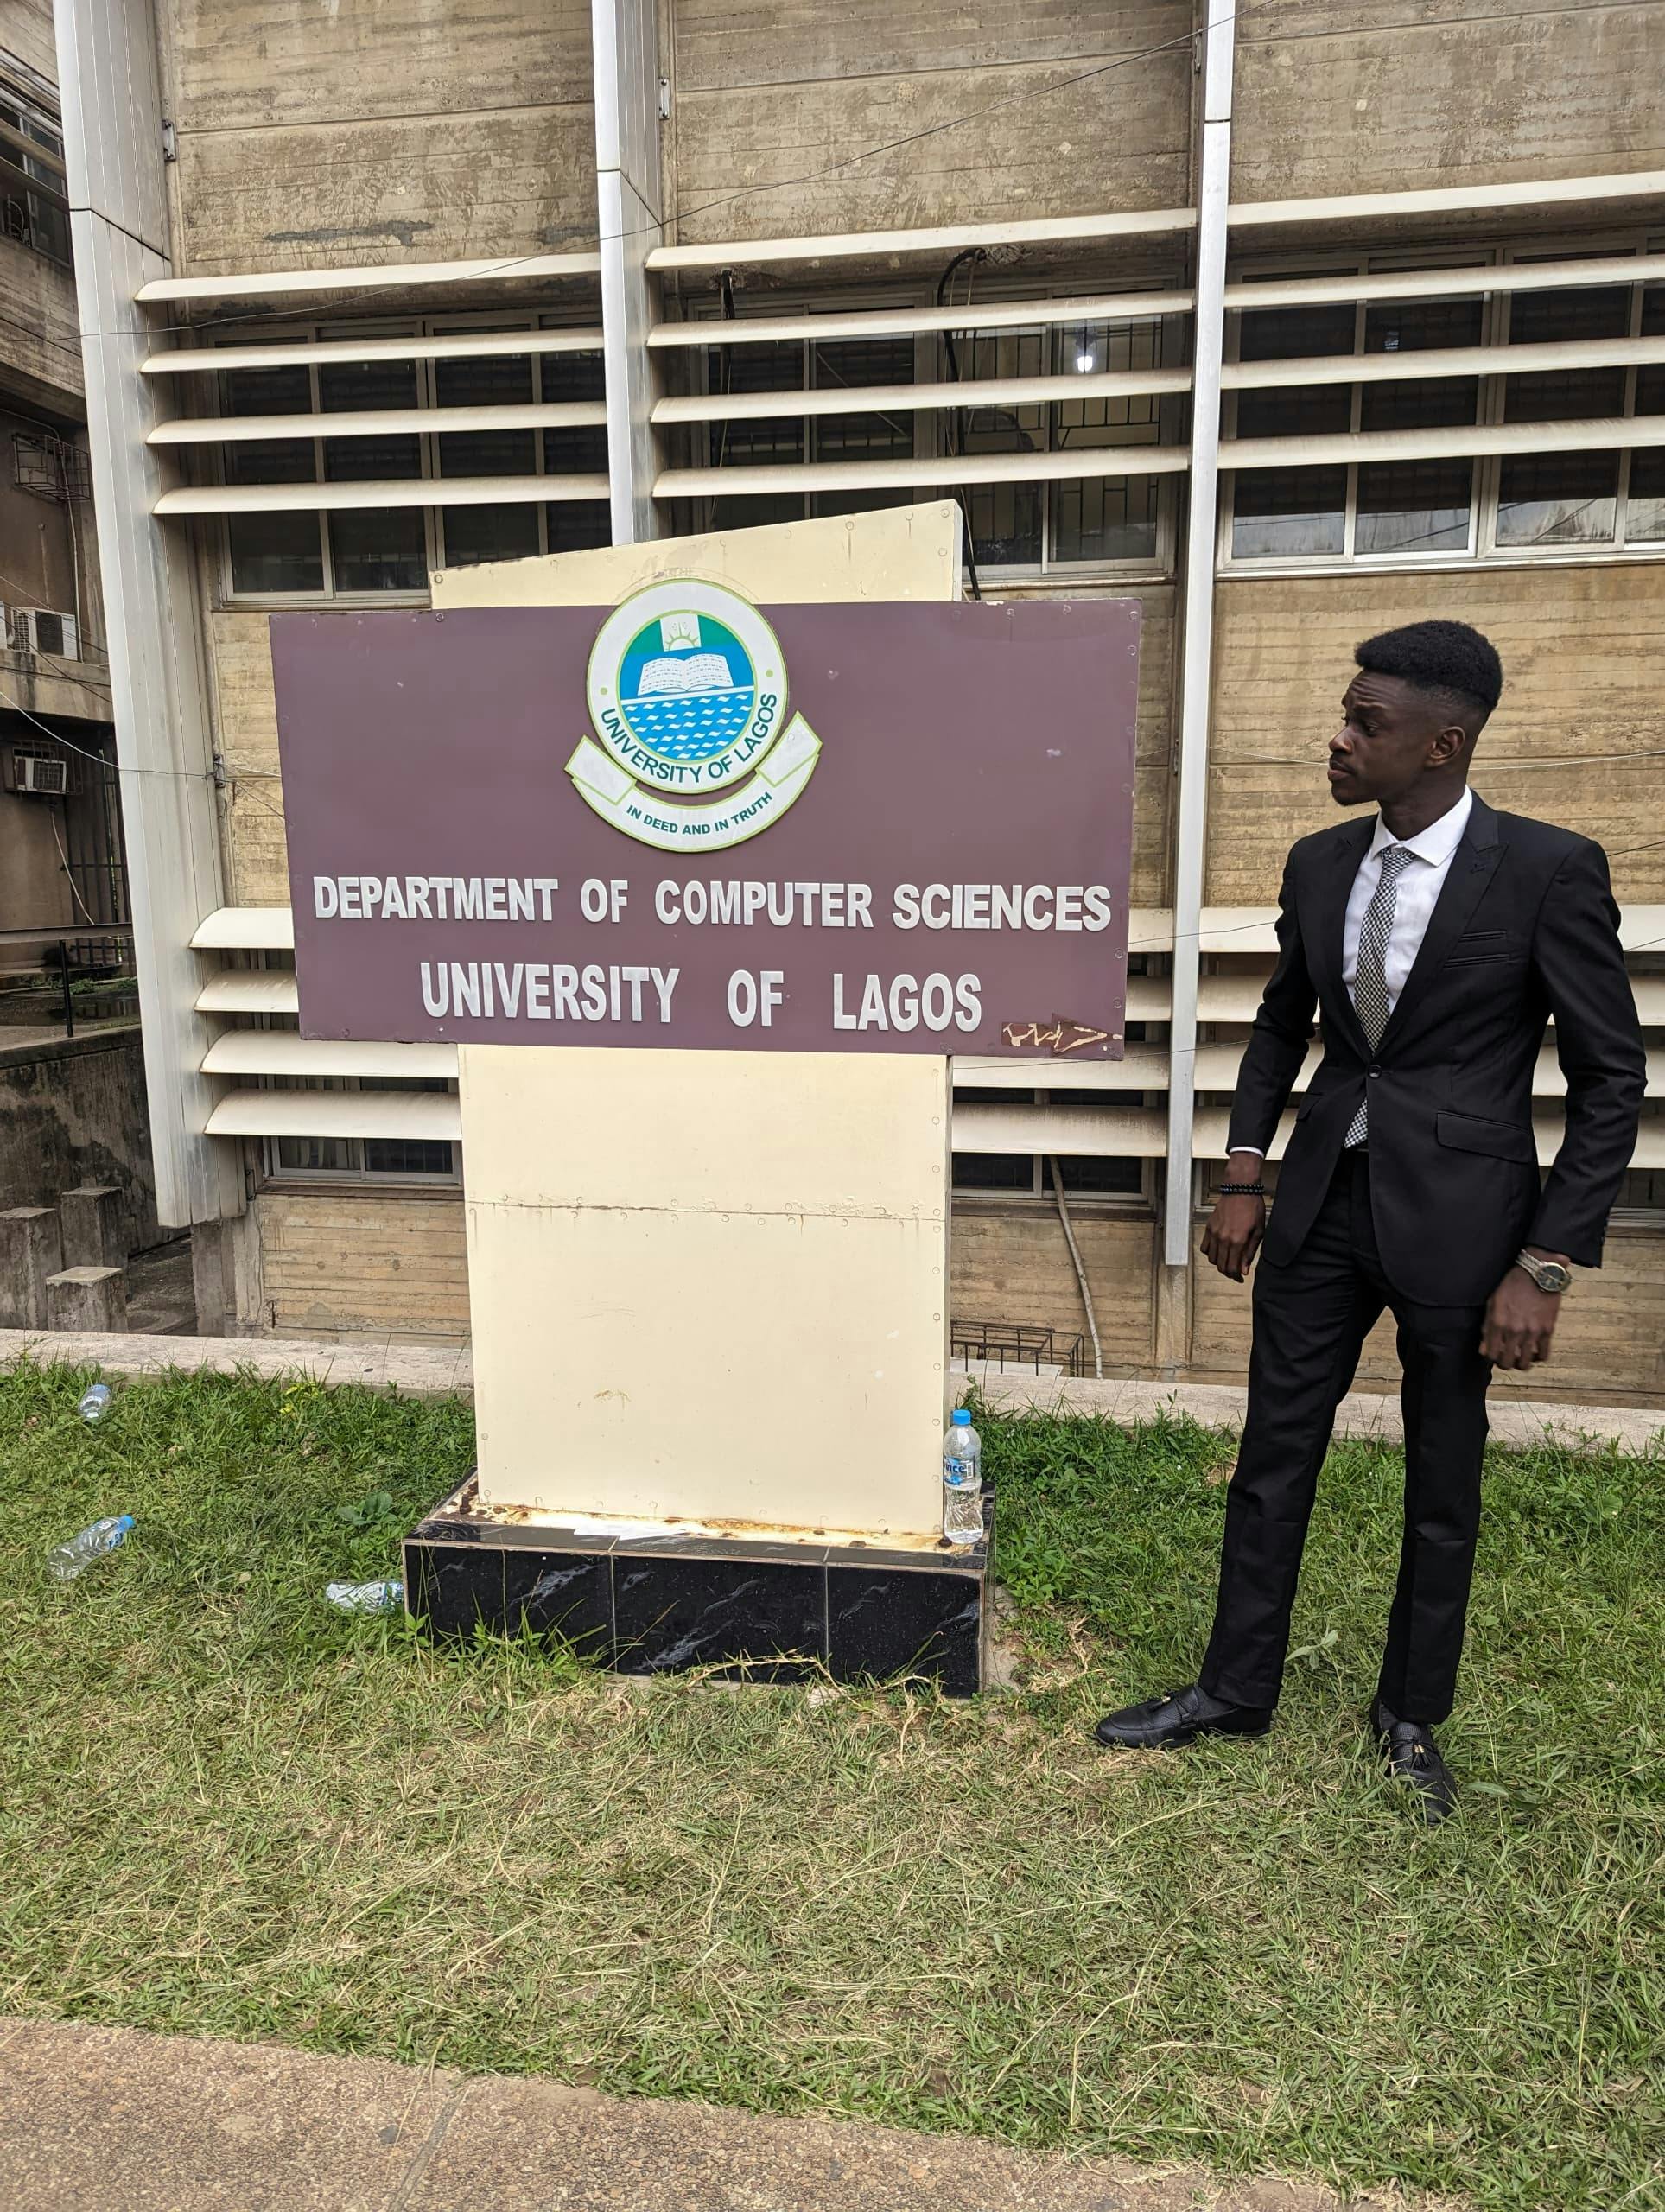 Sunkanmi dressed in a black suit with a black and silver colored tie standing next to the university of Lagos, Computer Science department sign board